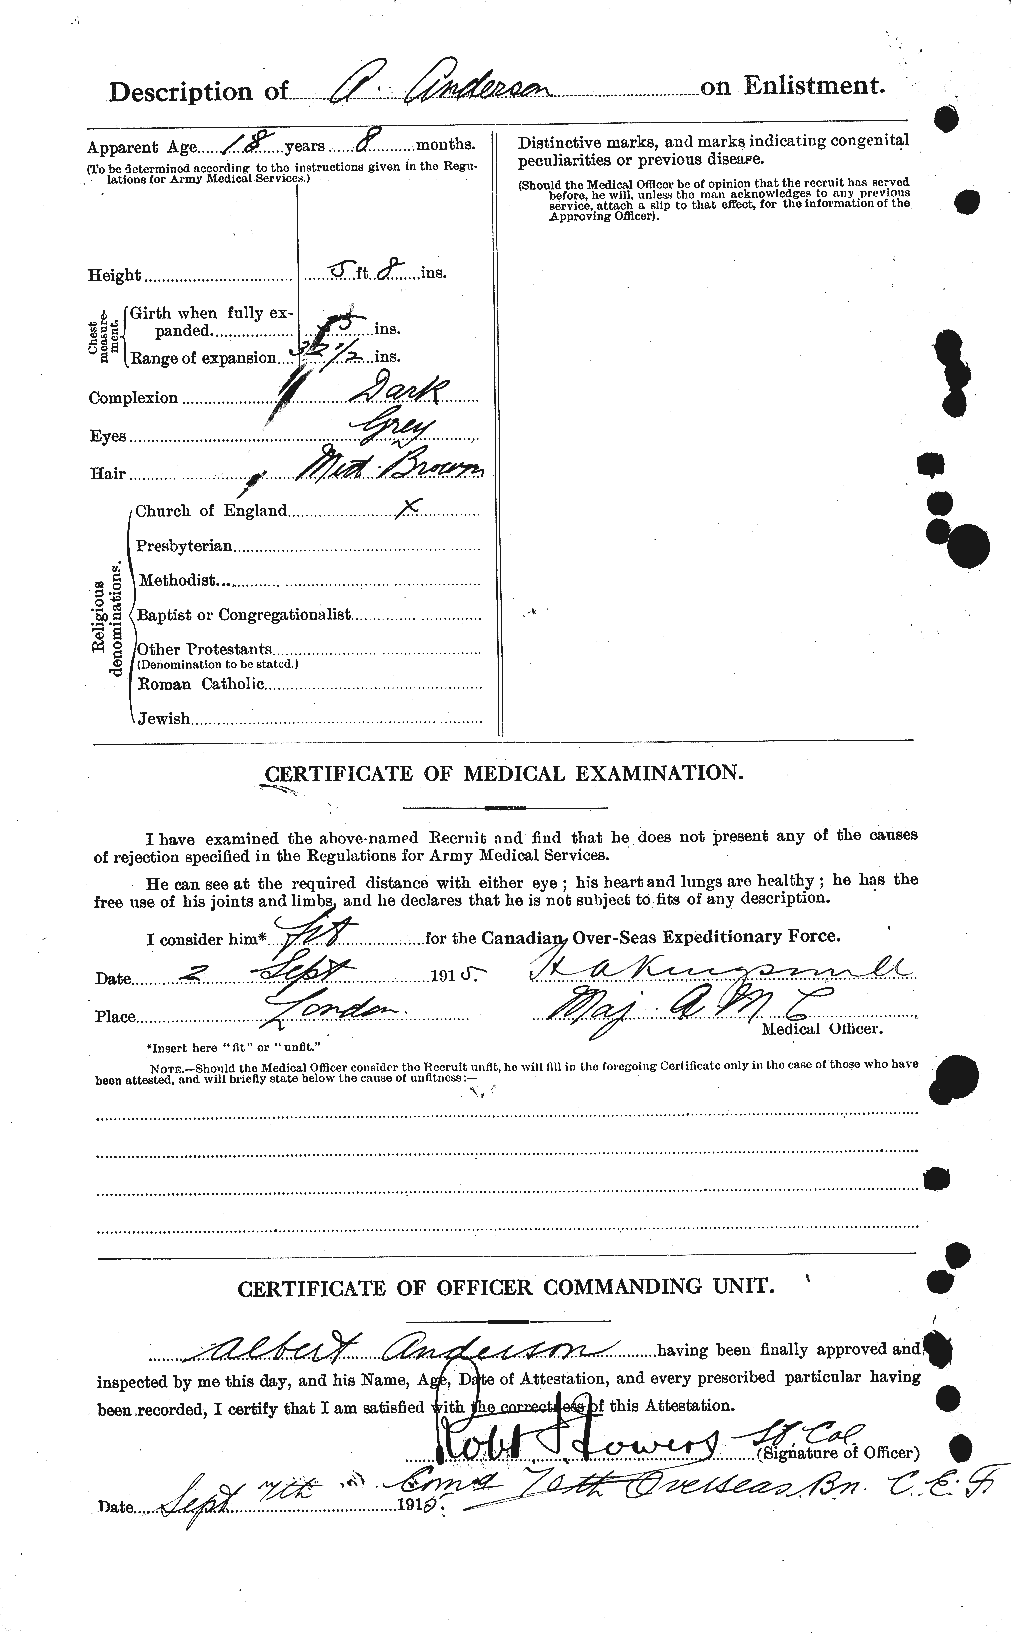 Personnel Records of the First World War - CEF 209558b